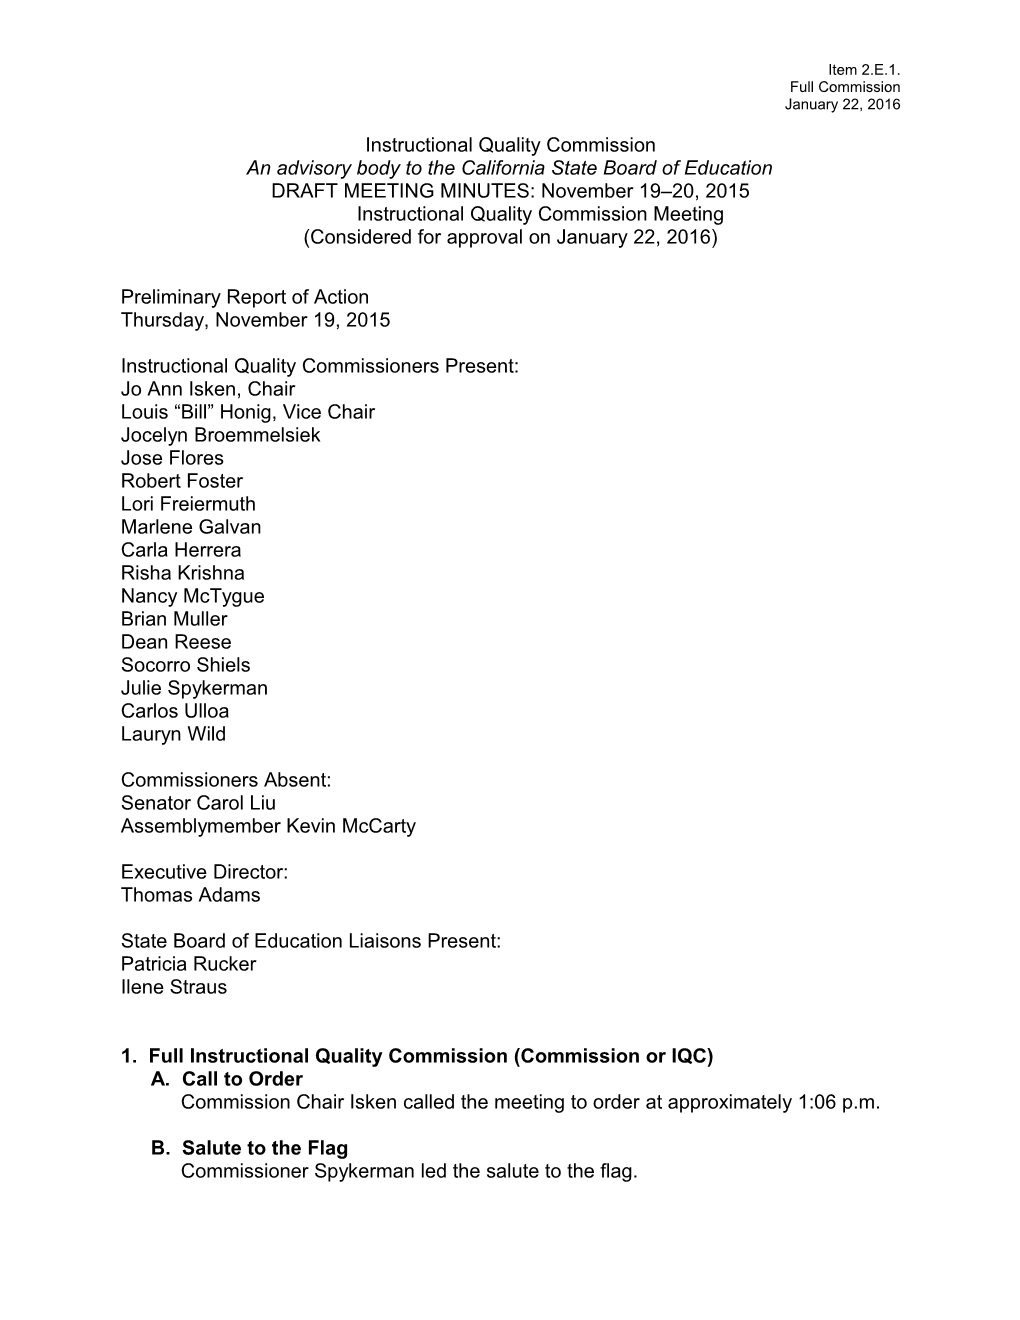 IQC Meeting Minutes November 19-20, 2015 - Instructional Quality Commission (CA Dept Of